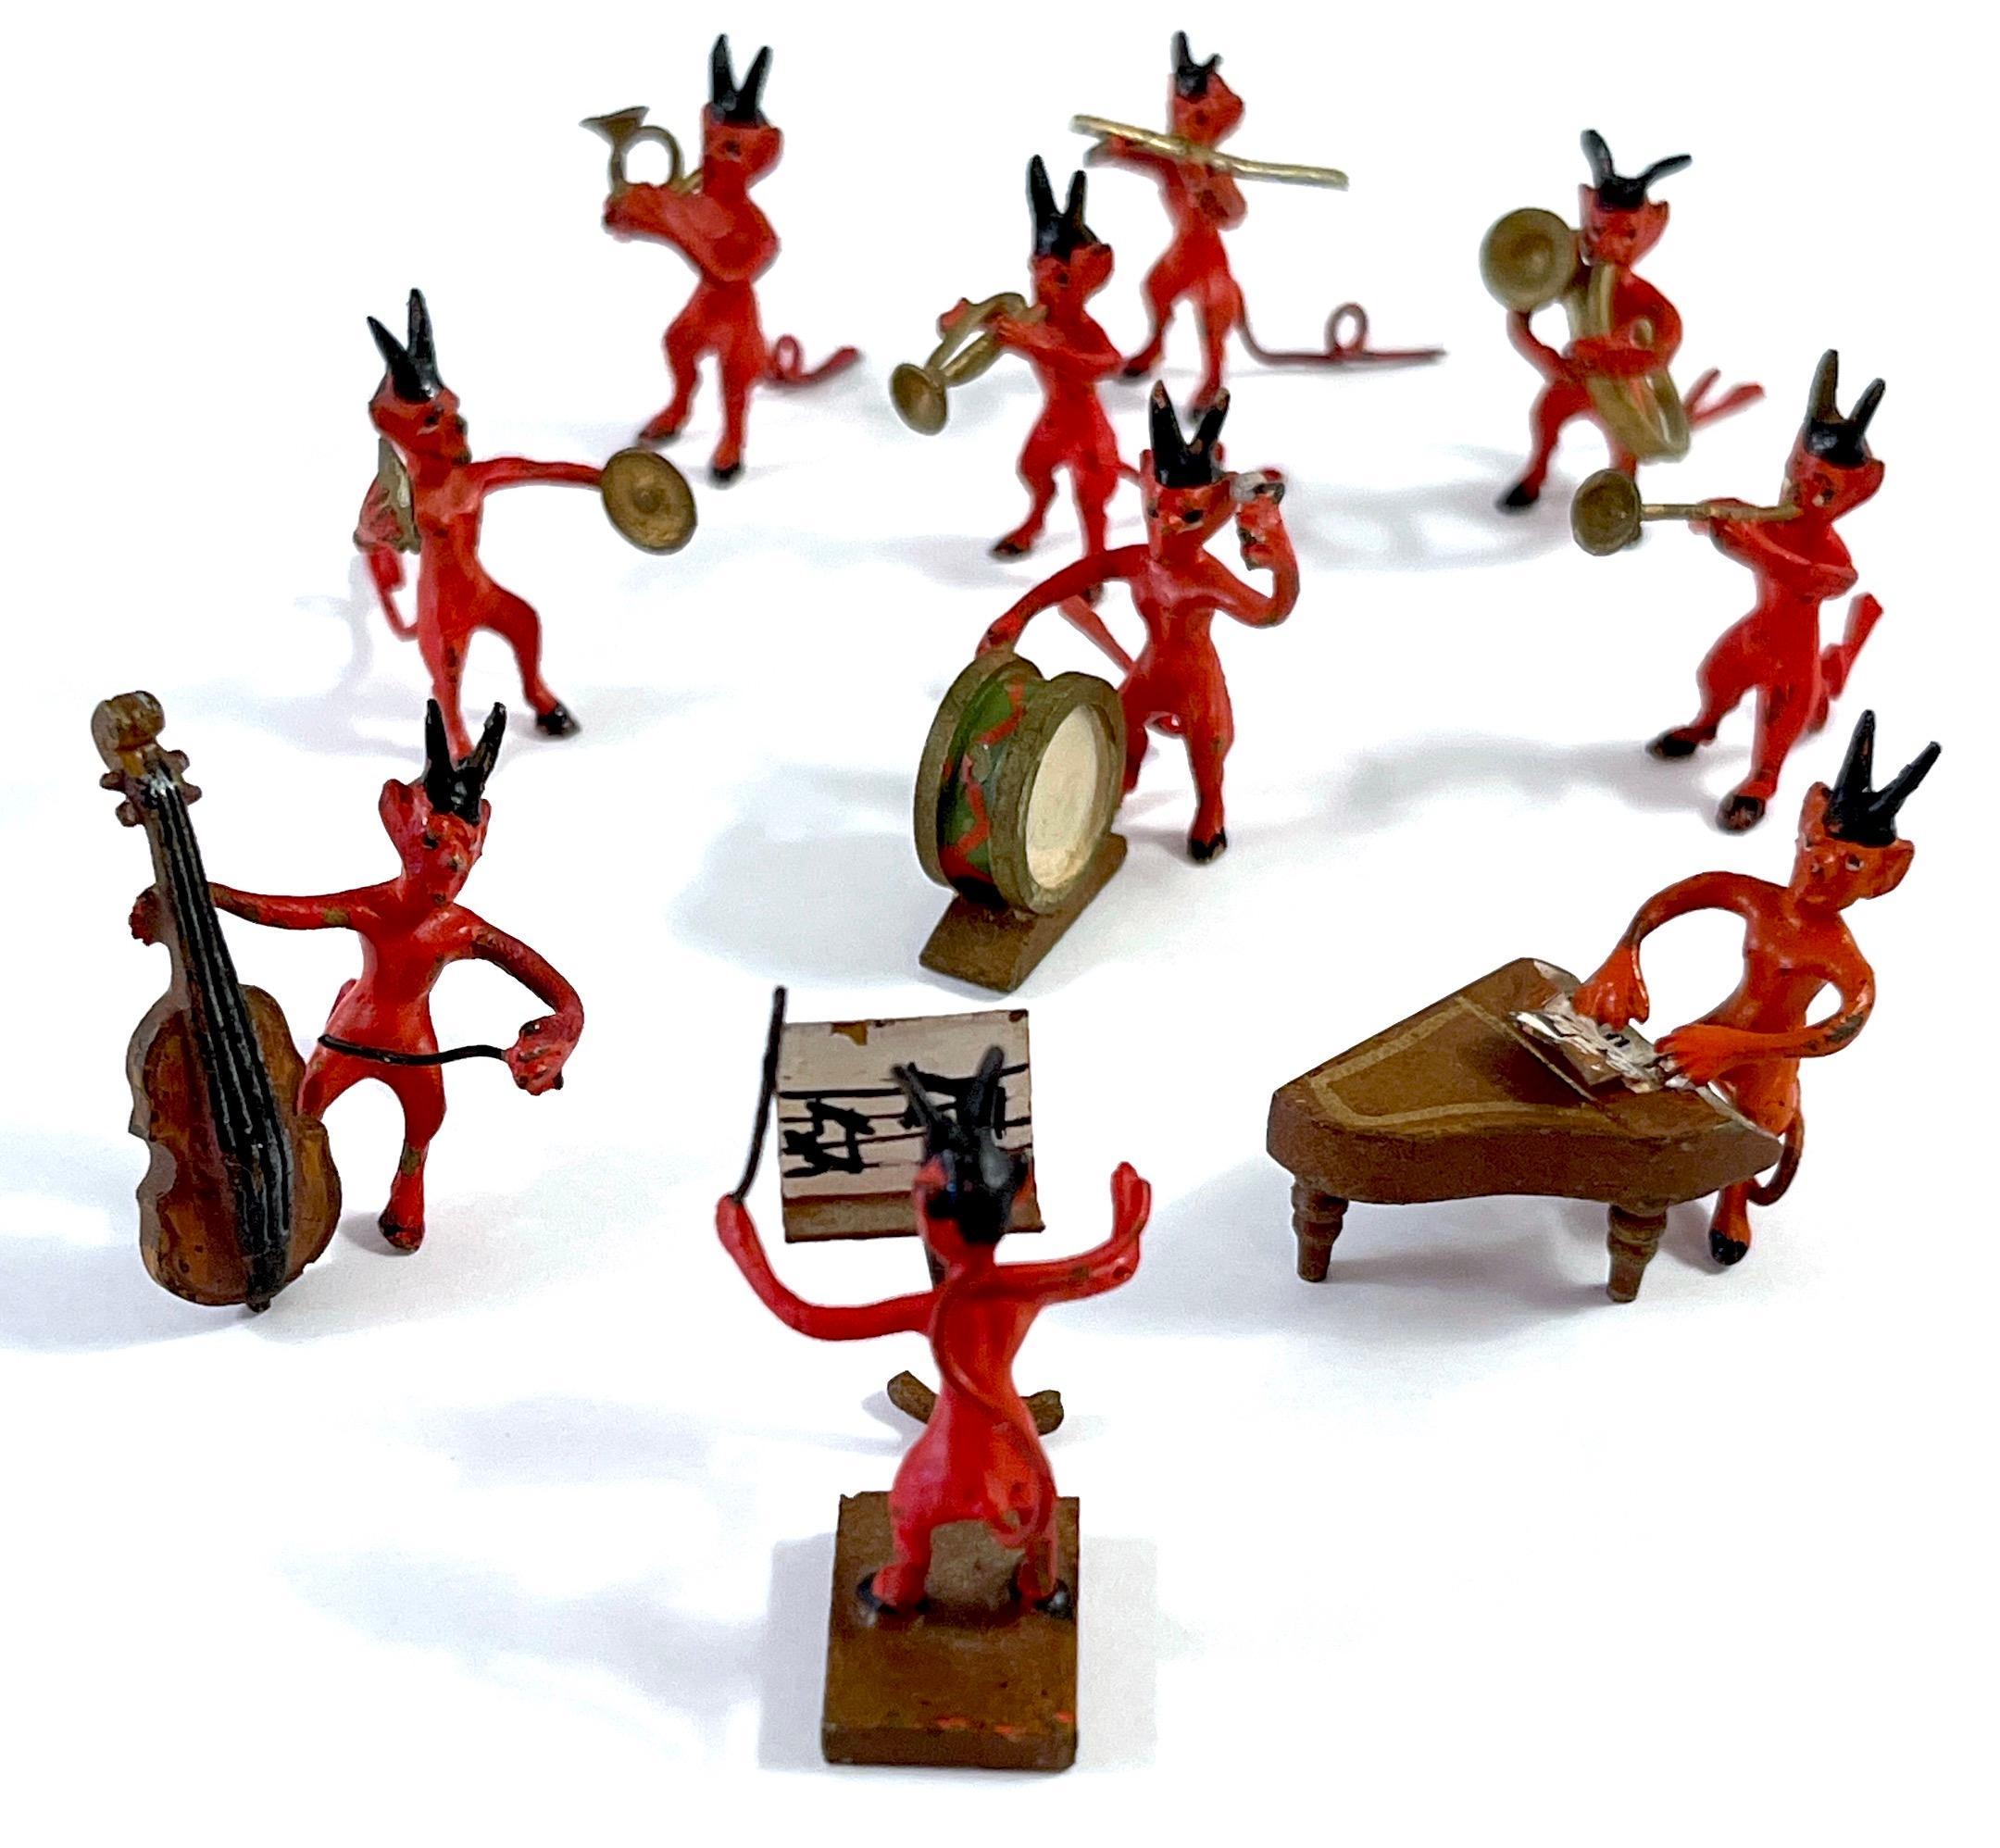 Vienna Cold Painted Bronze Ten Piece Devil Orchestra, Attributed Franz Bergman
Austria, circa 1925, attributed to Franz Bergman, unmarked

Embark on a whimsical journey with this rare and delightful Vienna Cold Painted Bronze Ten Piece Devil